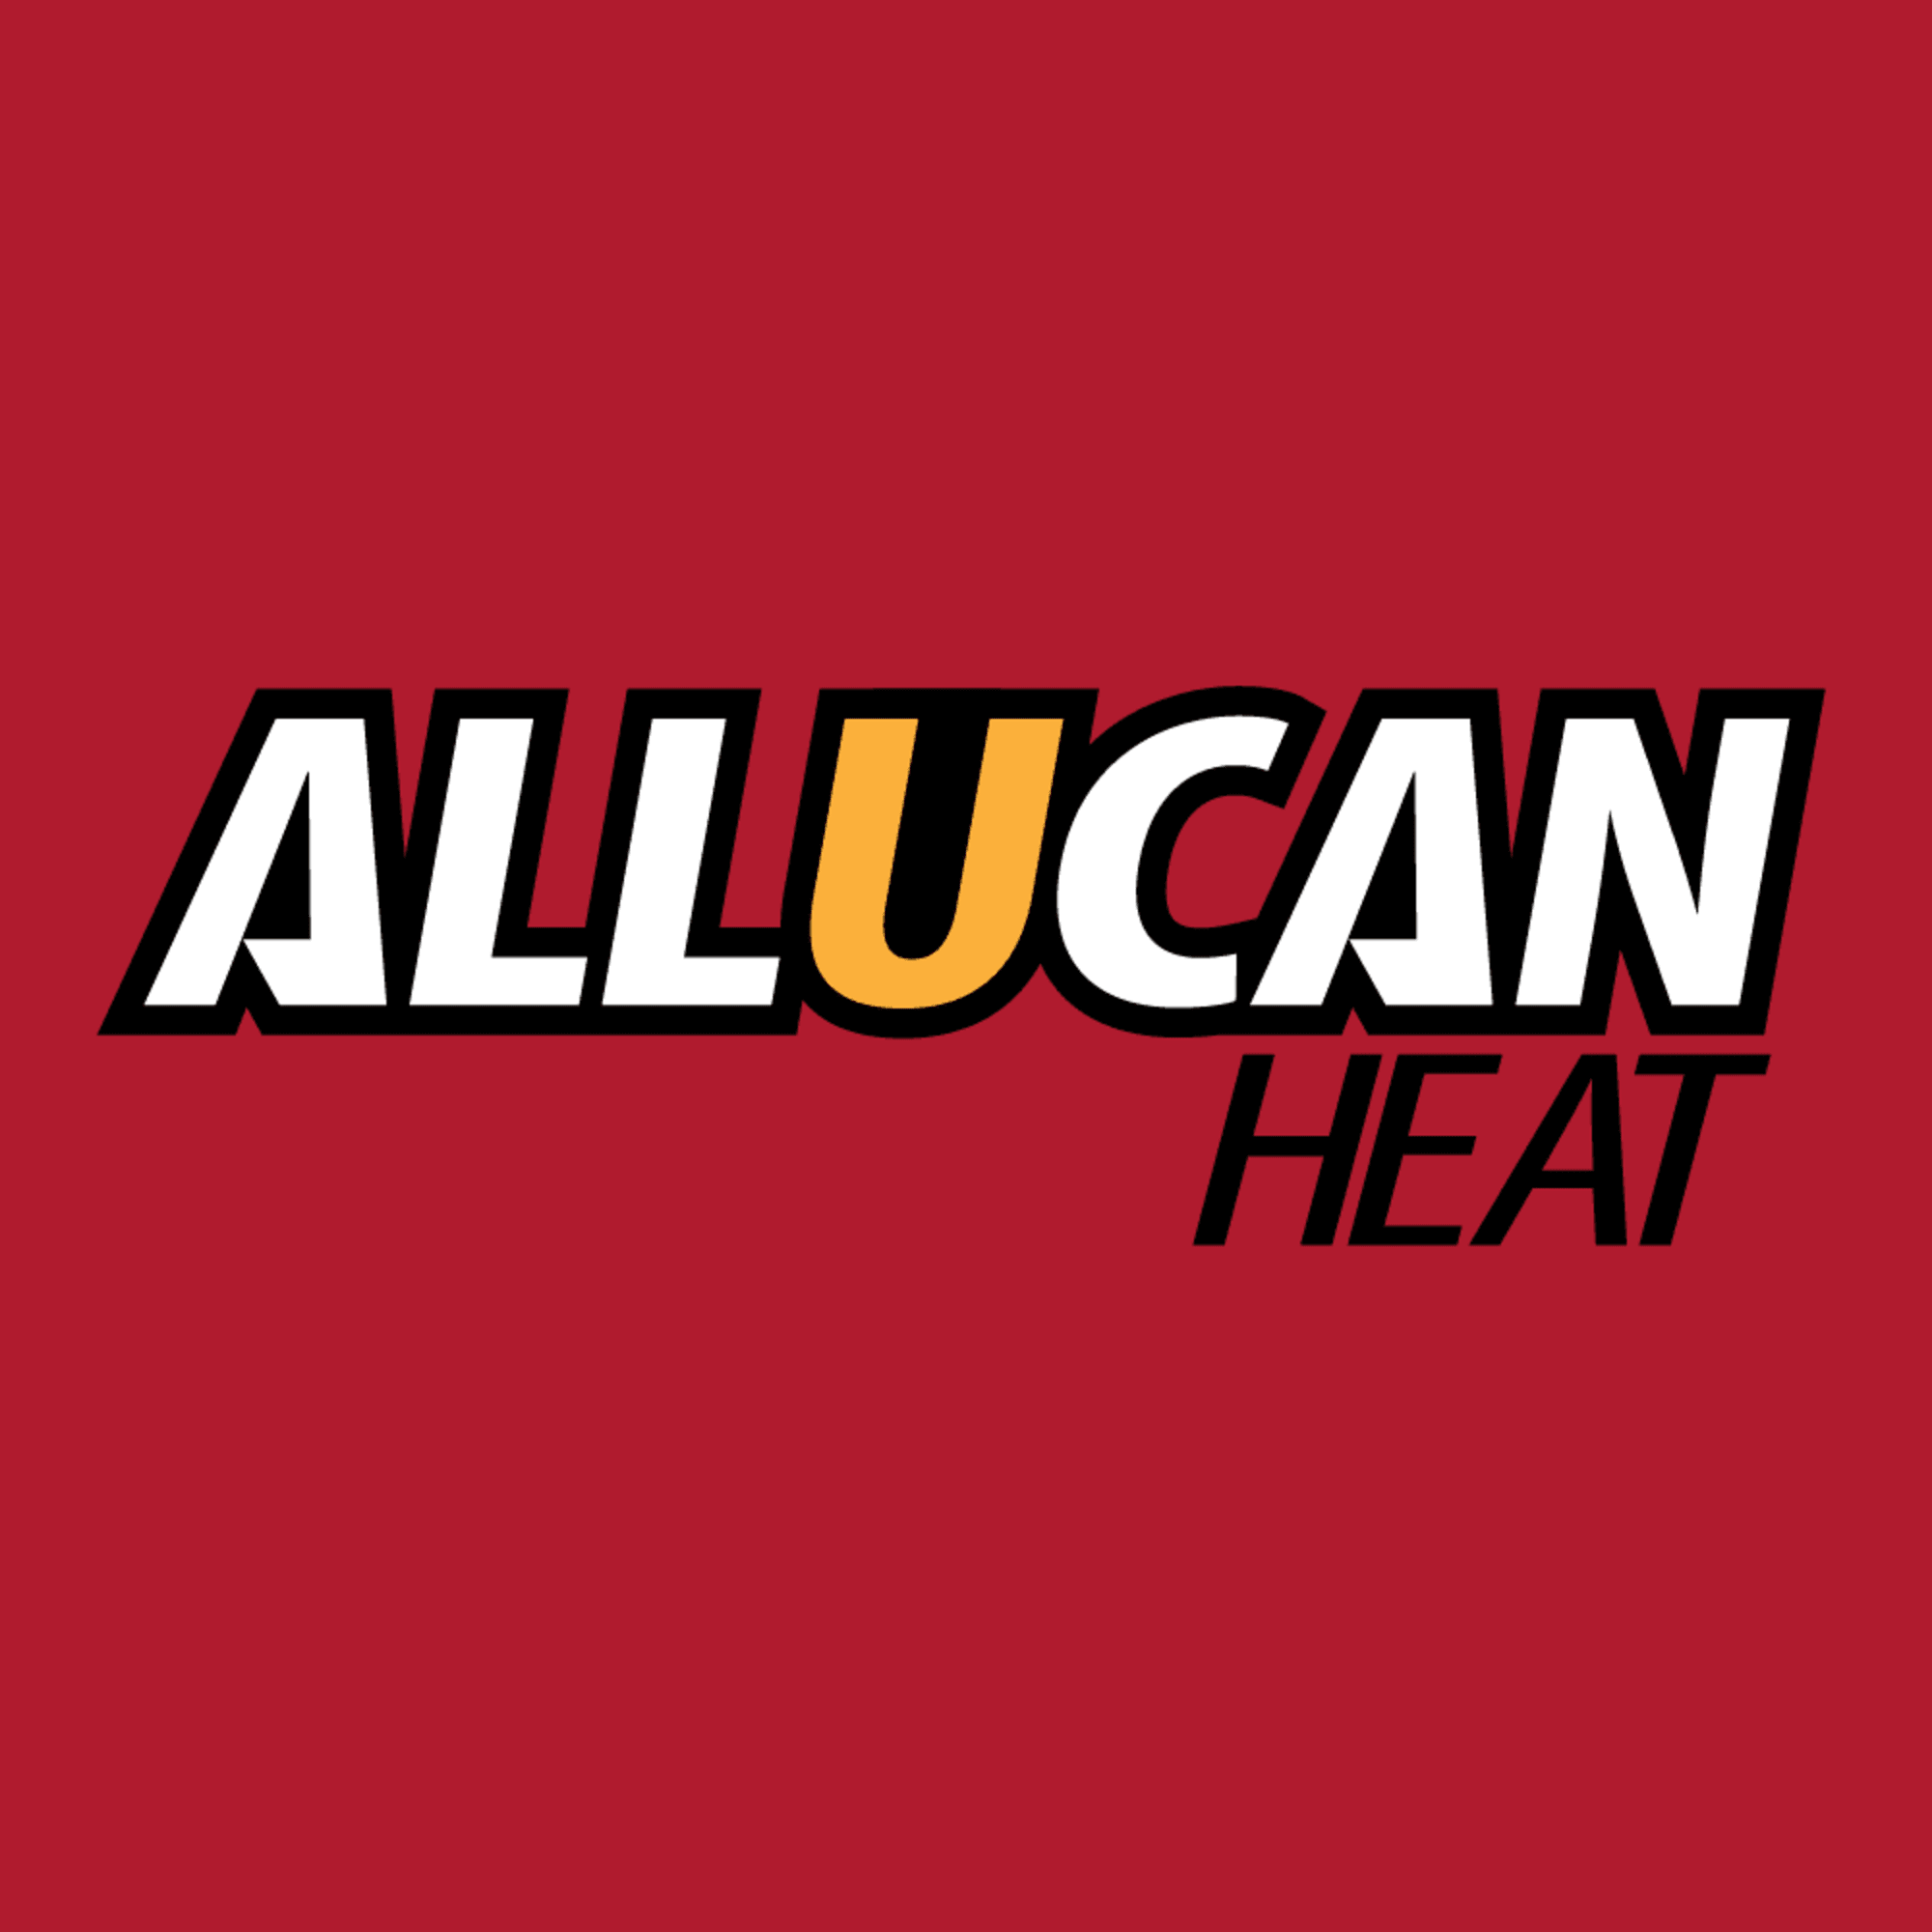 All you can heat